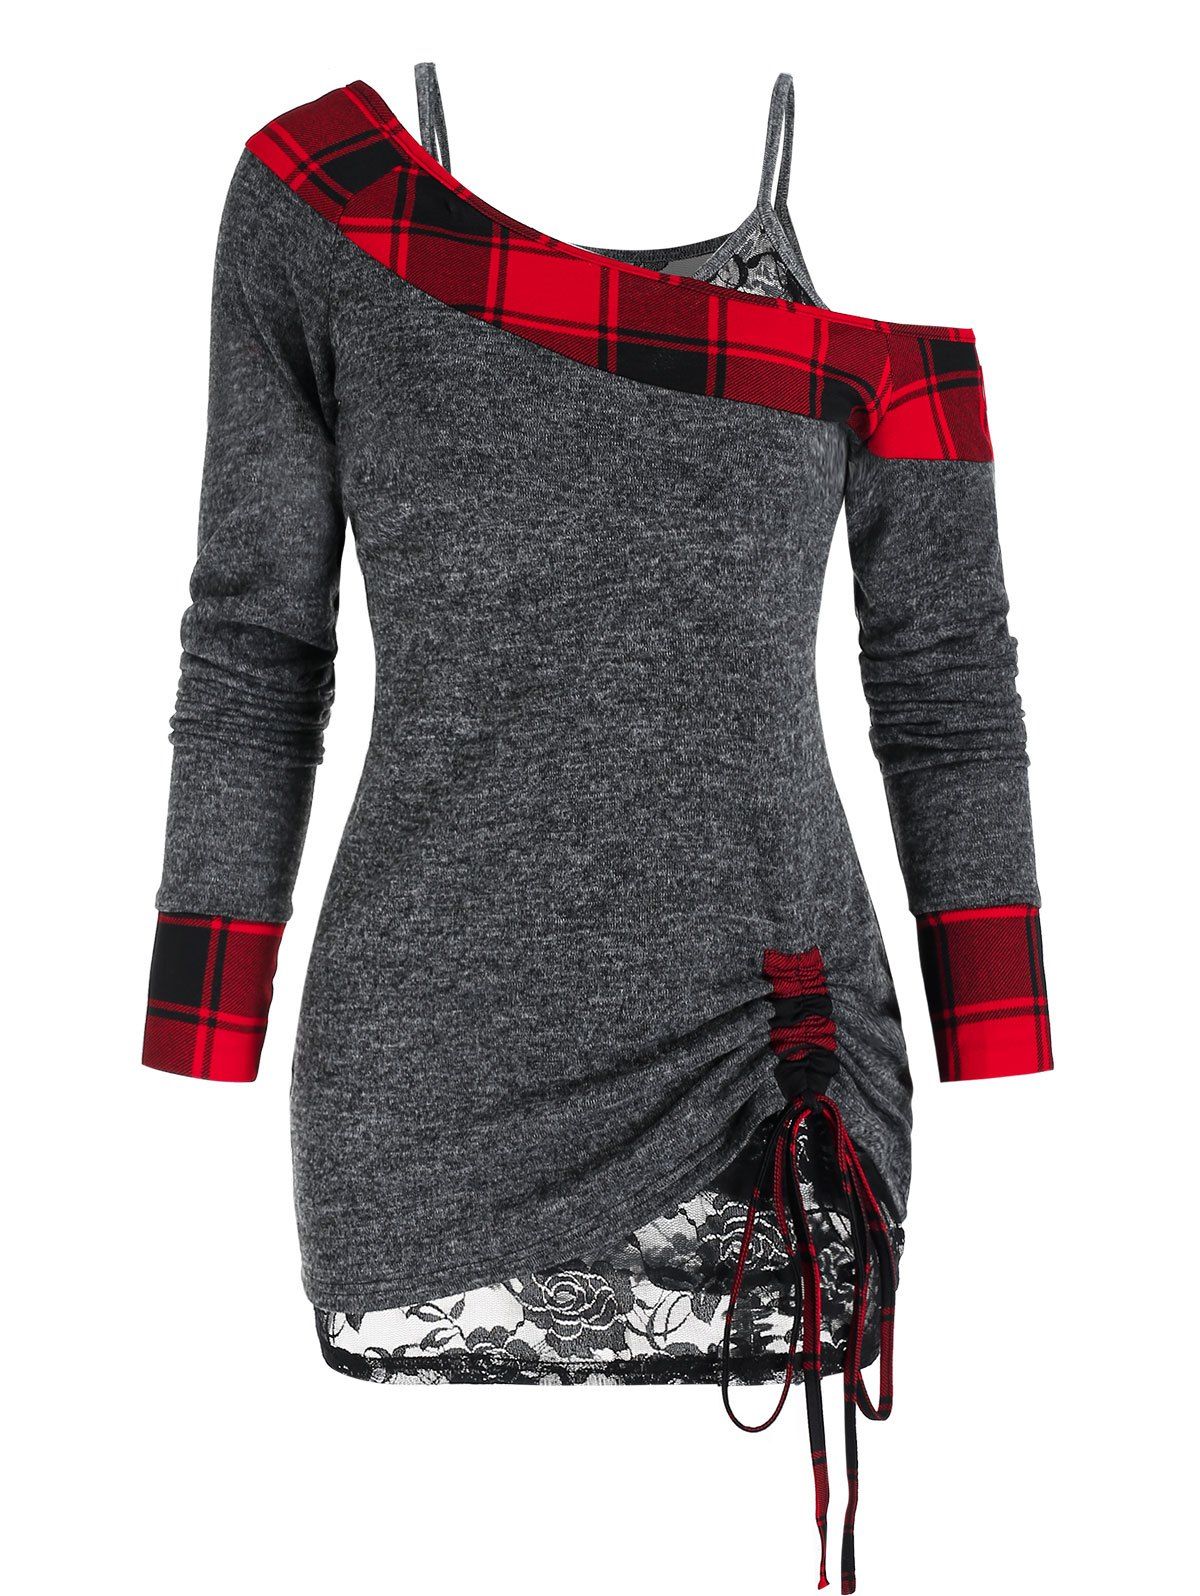 Plaid Skew Neck Cinched Knitwear and Lace Top Set - multicolor A 3XL